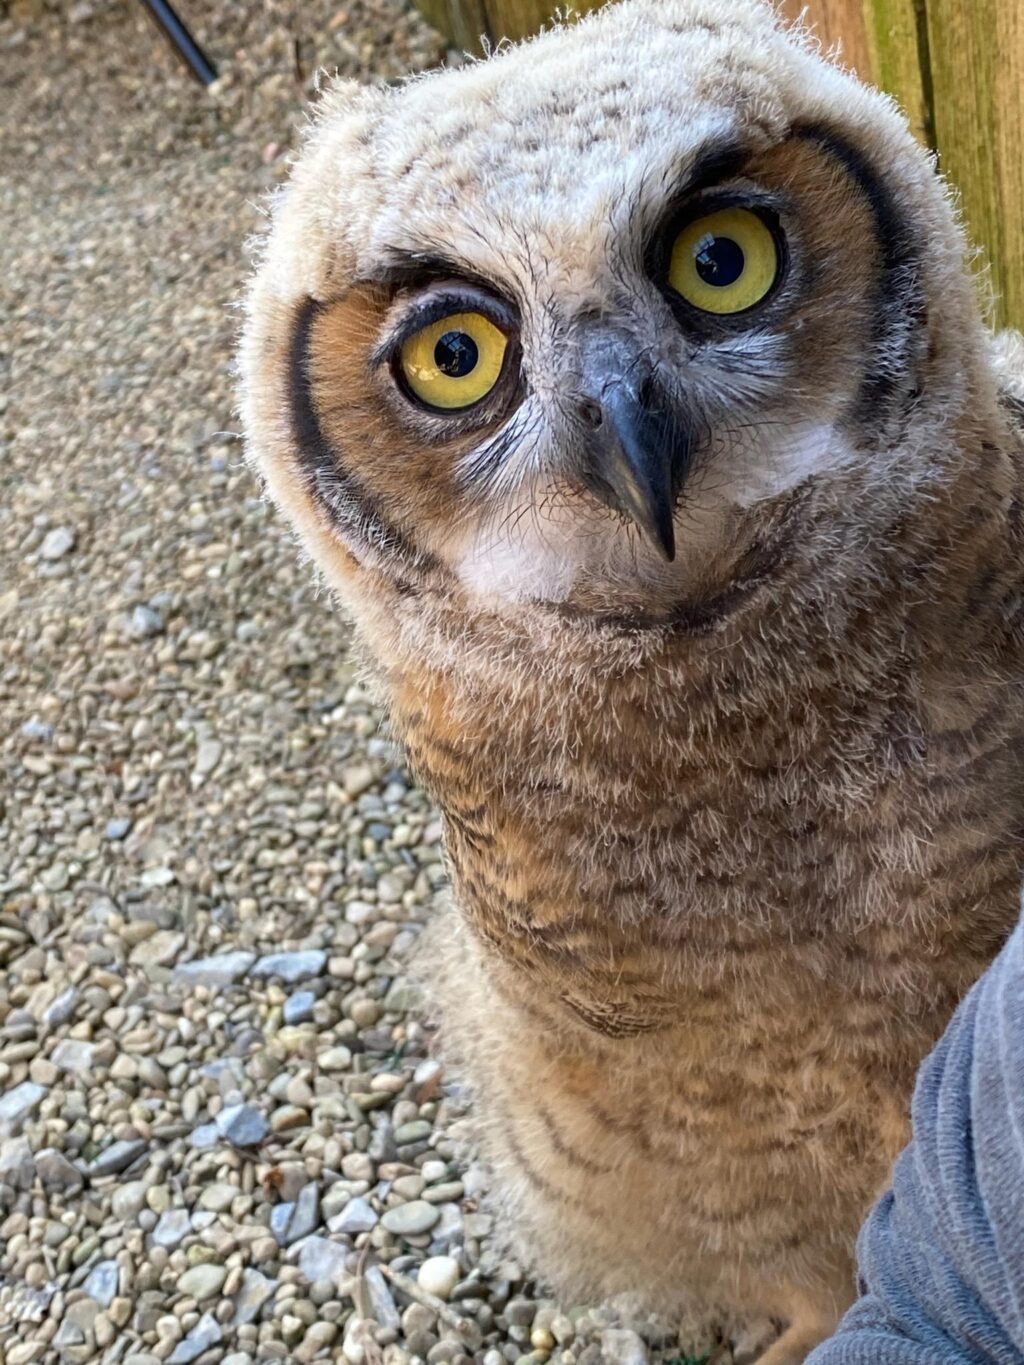 Sunny, the Great Horned Owlet, peeks out from behind his trainer's shoulder